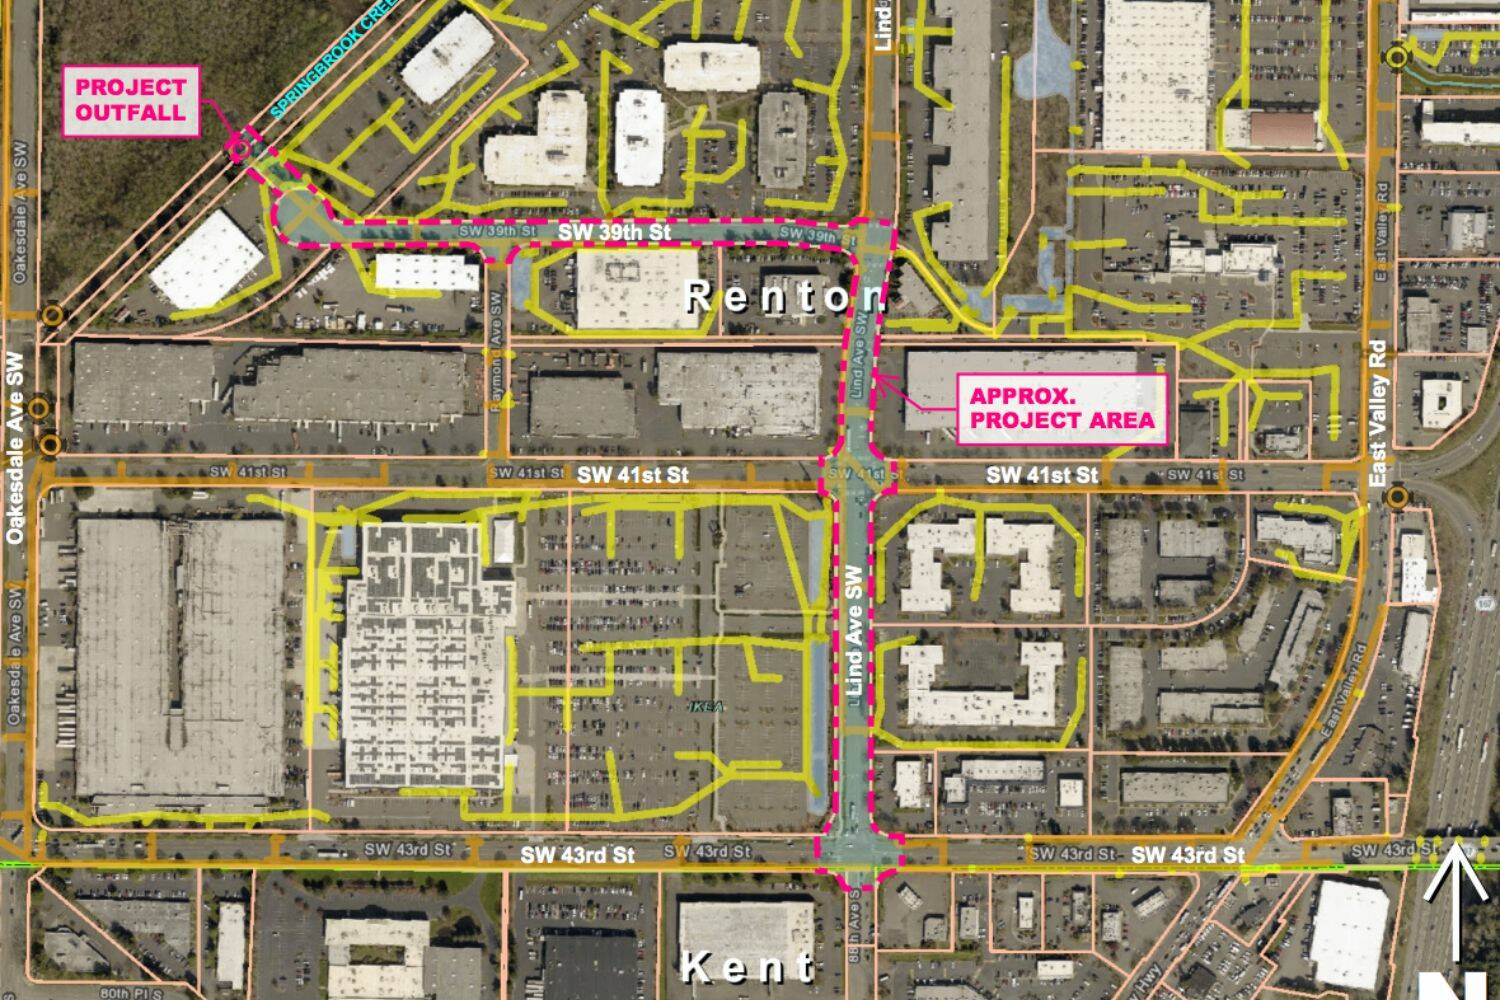 Project site map for Lind Avenue SW Storm System Improvement Project. (Screenshot from city documents)